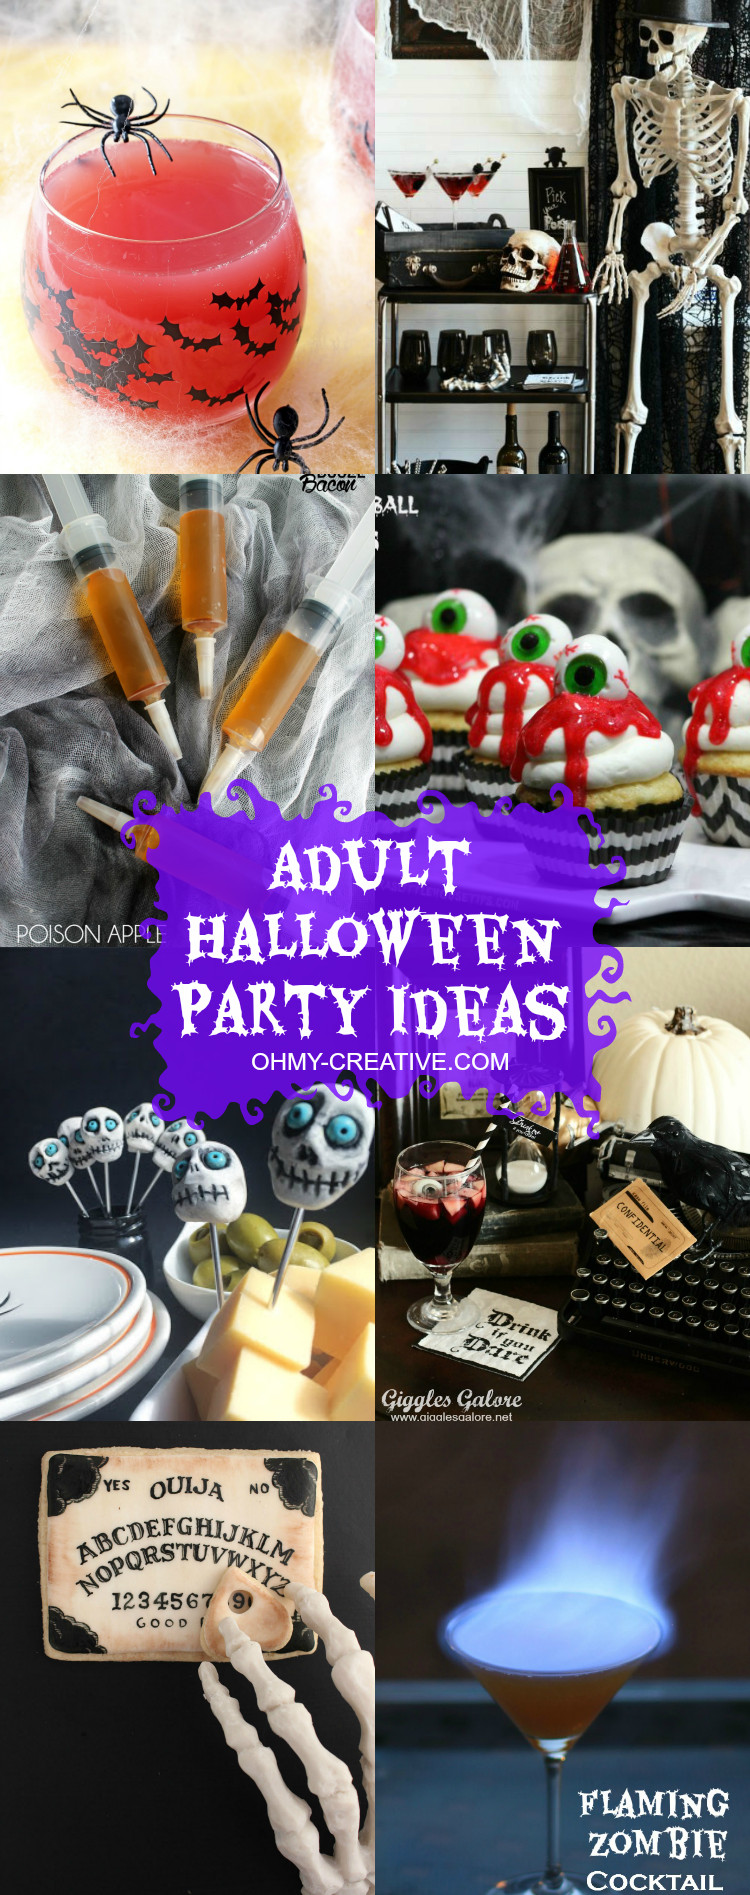 Fun Halloween Party Ideas For Adults
 Adult Halloween Party Ideas Oh My Creative